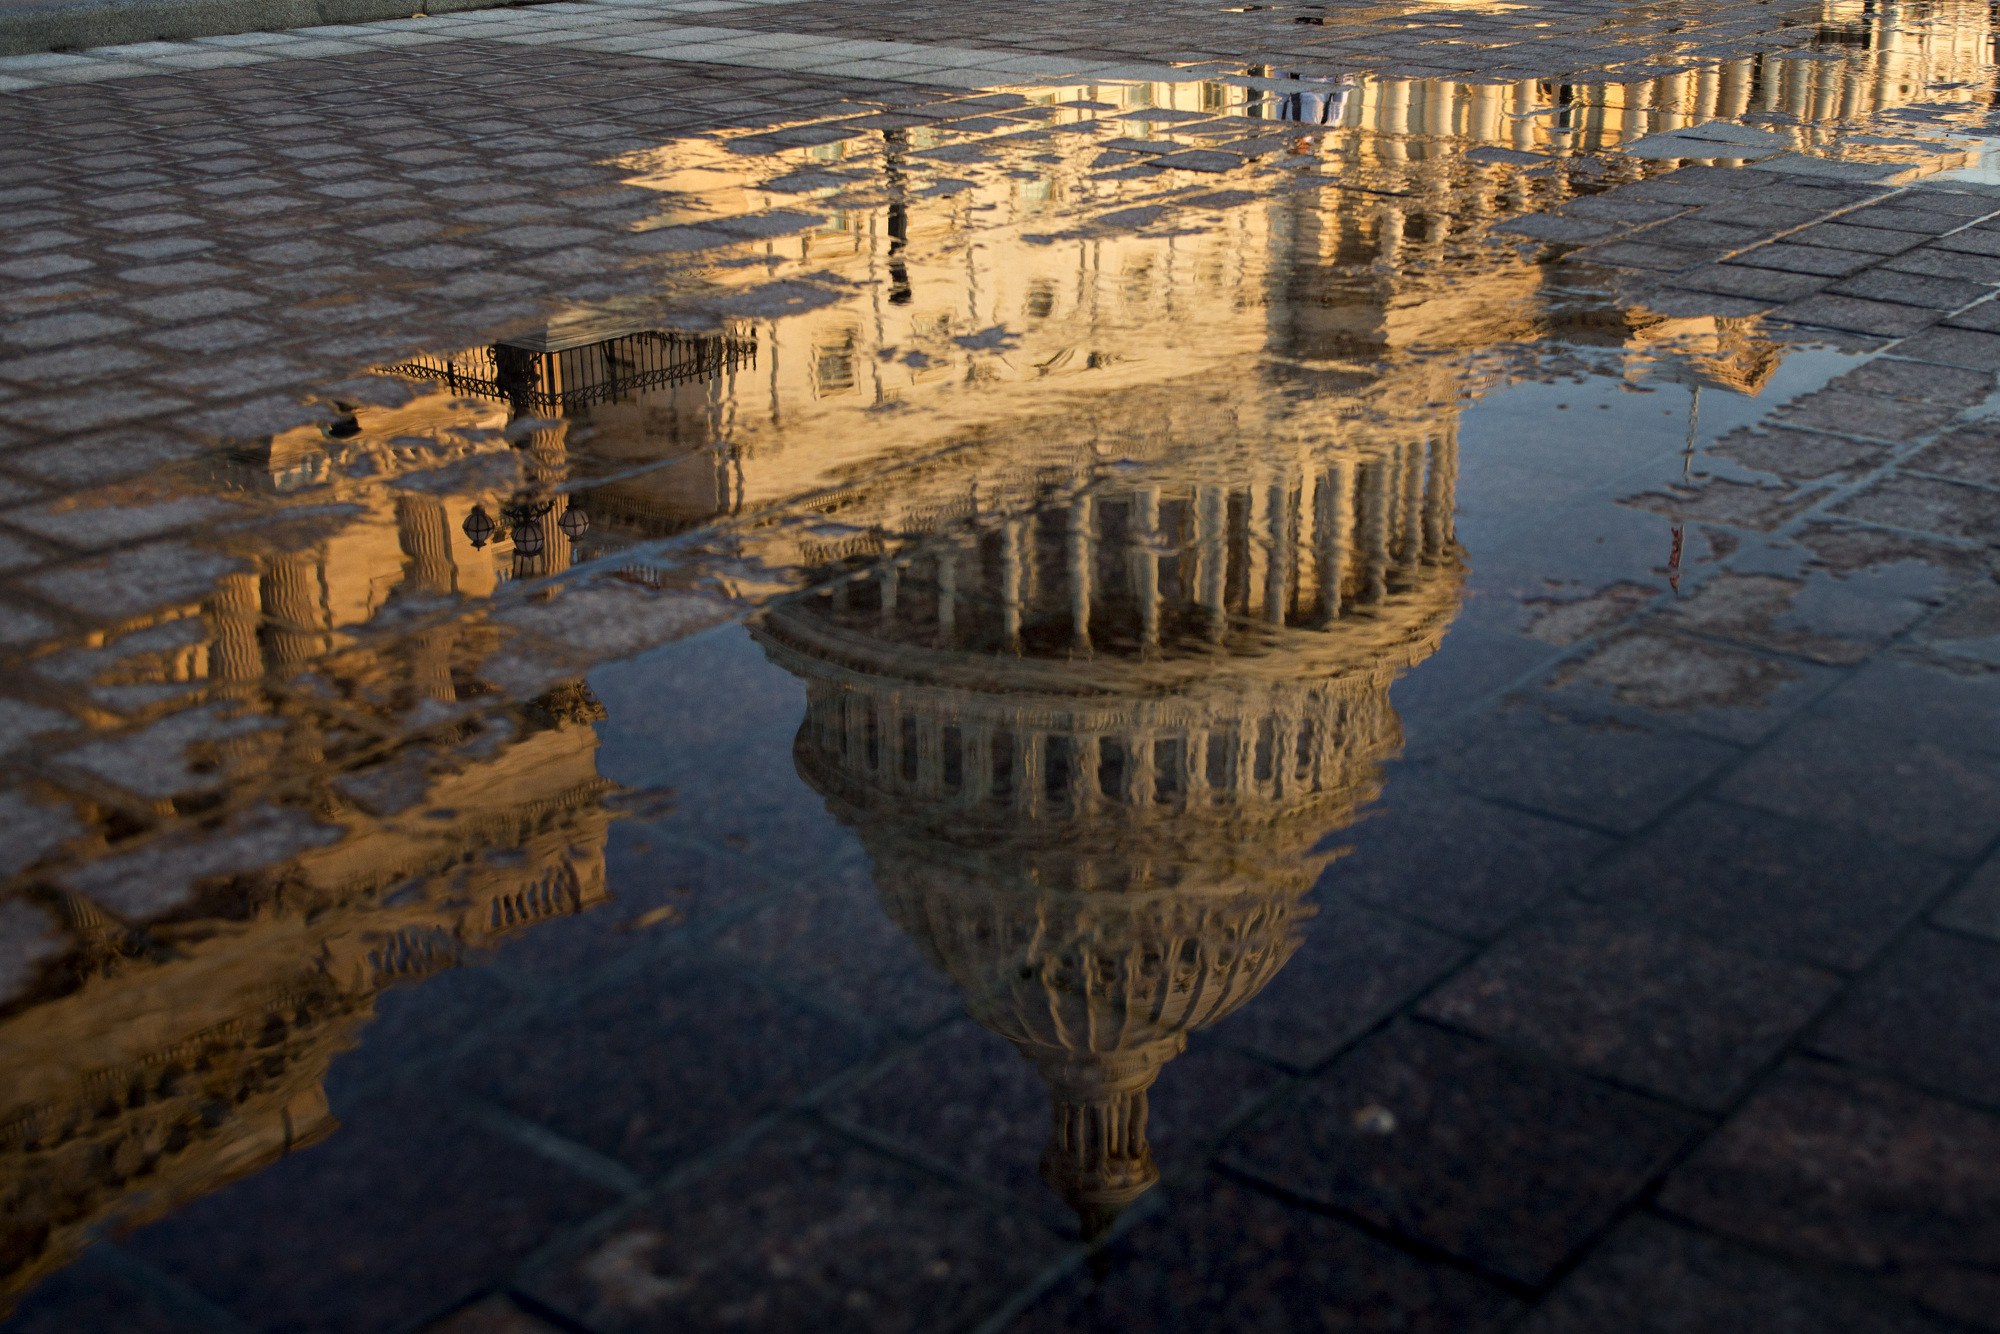 The U.S. Capitol building is reflected in a puddle at sunrise in Washington, D.C., U.S., on Wednesday, July 19, 2017. The Senate early next week will consider the motion to proceed to legislation to repeal Obamacare without finding a replacement for two years after a setback for Republicans' efforts this week to repeal and replace the bill. Senate Majority Leader McConnell said he's scheduling the vote at the request of President Trump and Vice President Pence.